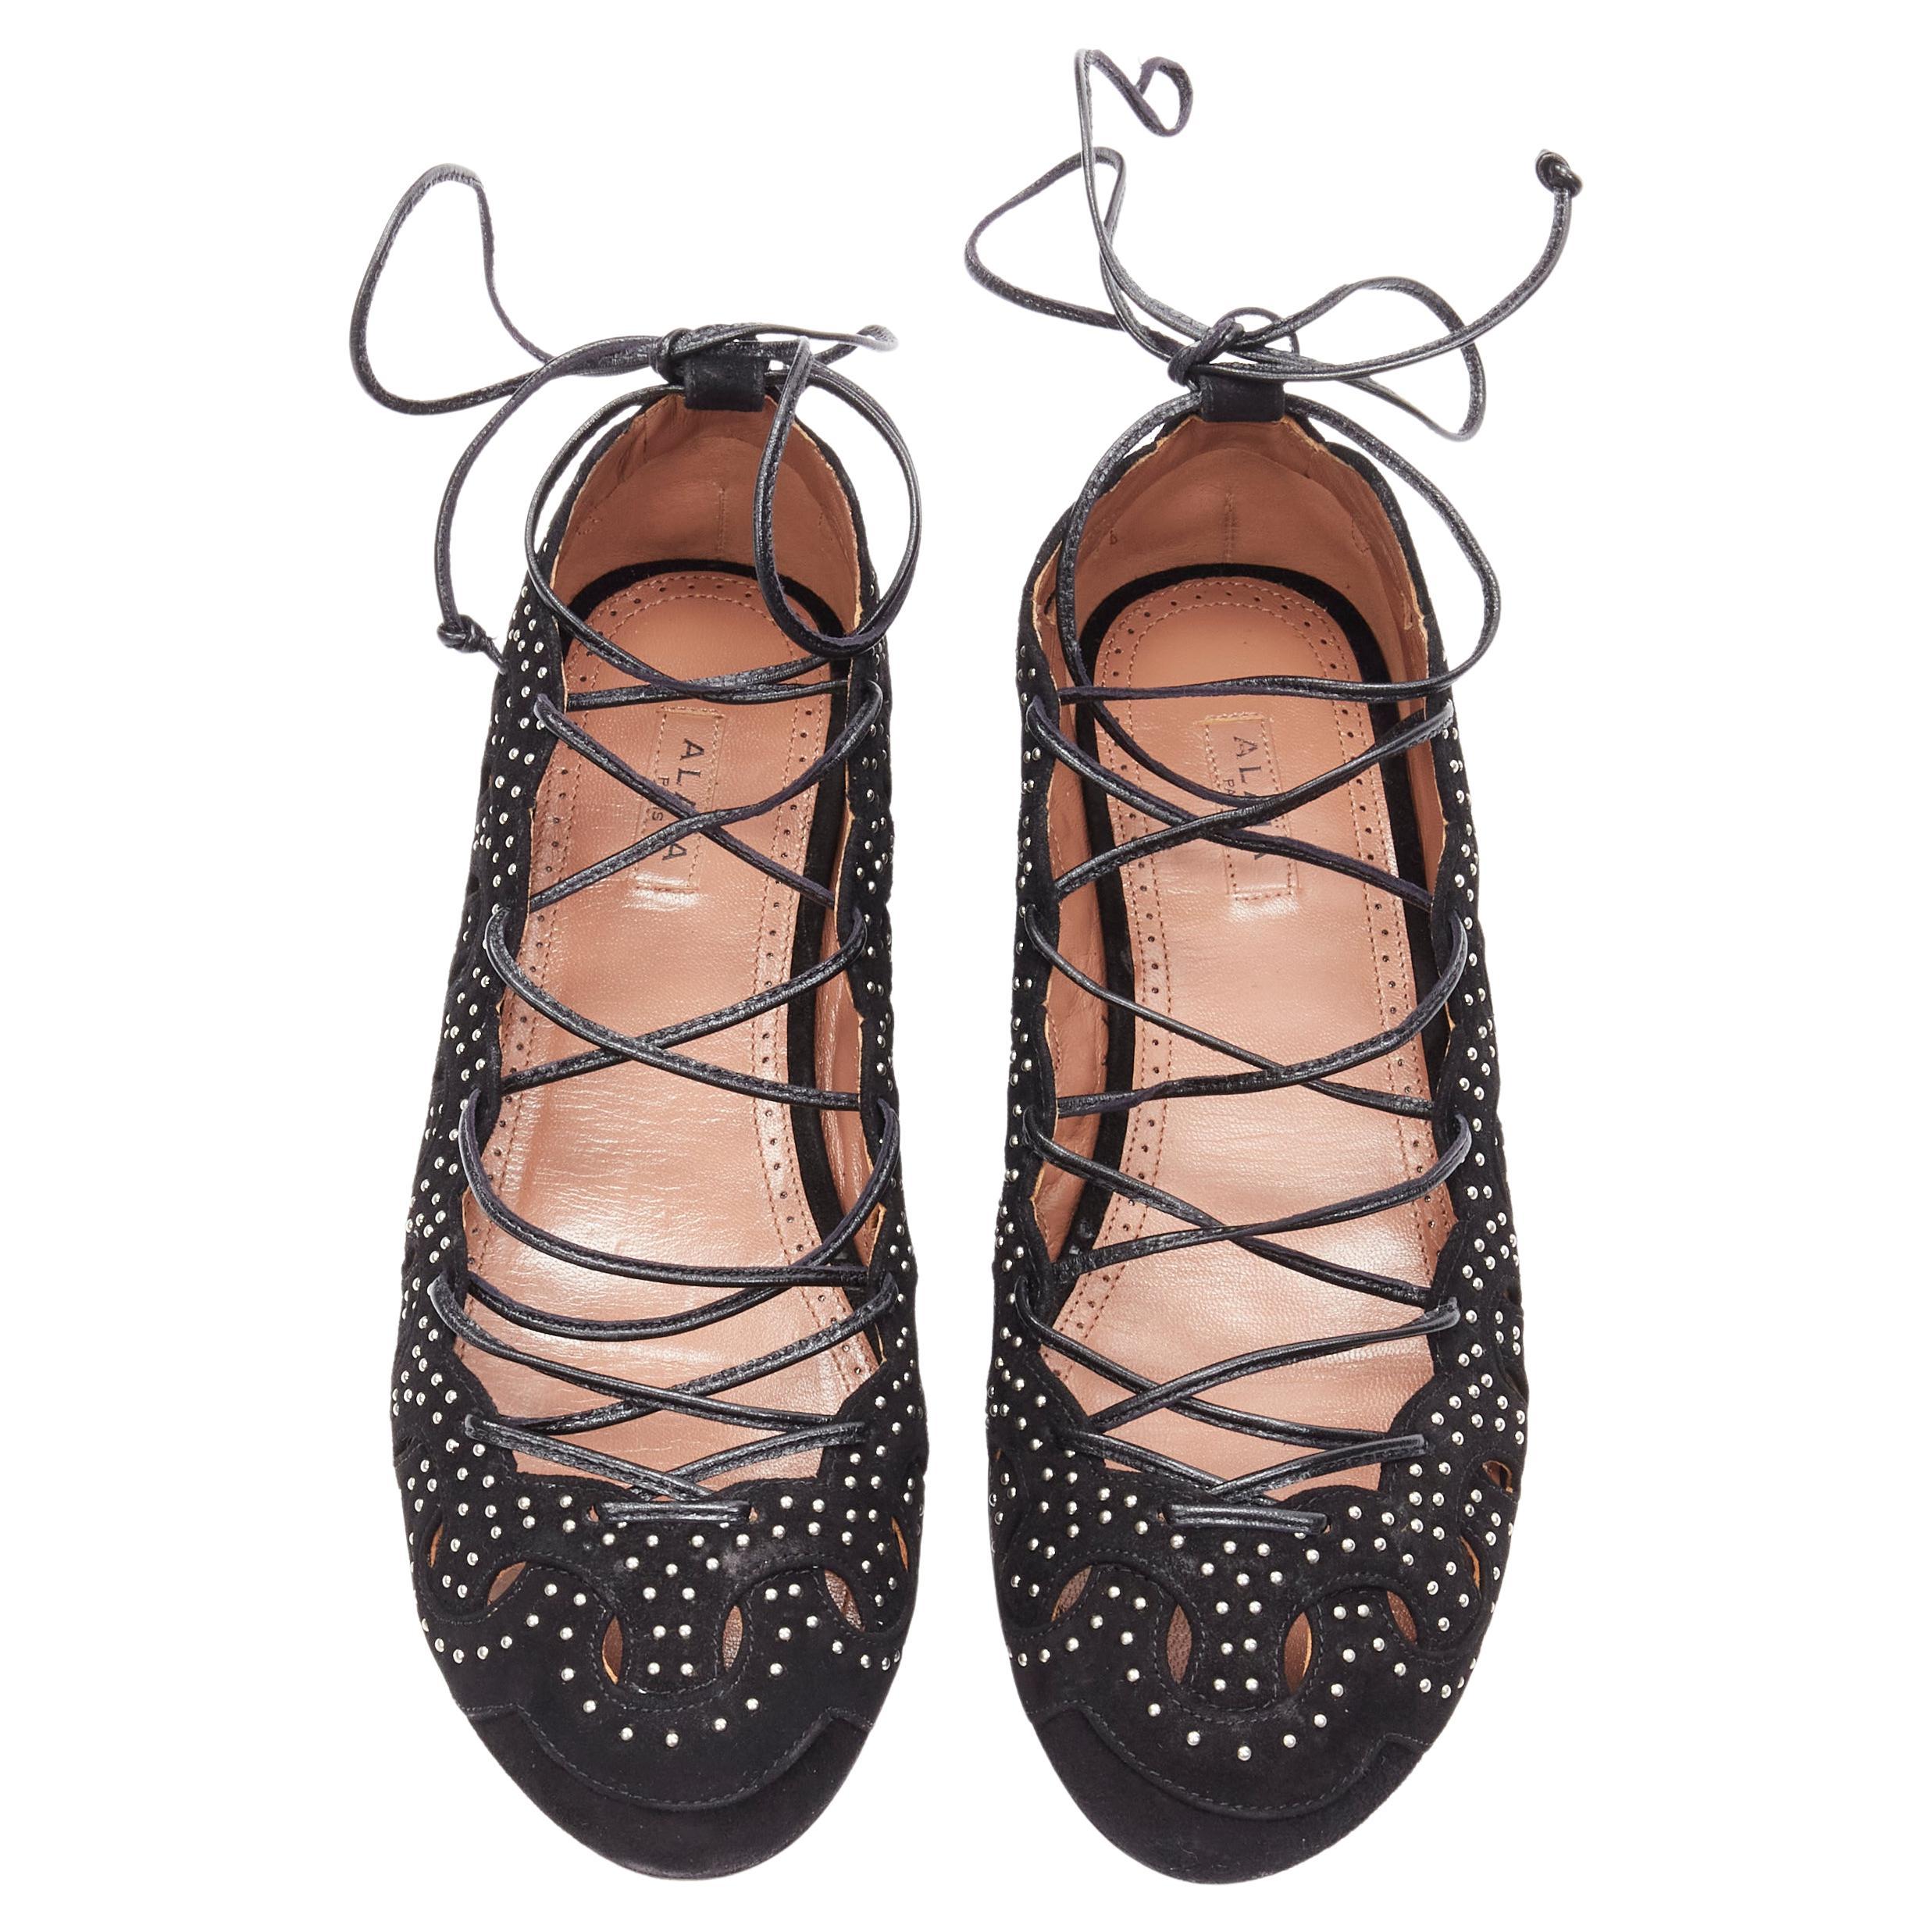 ALAIA black suede silver studed circle cut out lace up ballerina flats EU37 
Reference: MELK/A00226 
Brand: Alaia 
Designer: Azzedine Alaia 
Material: Suede 
Color: Black 
Pattern: Solid 
Closure: Lace Up 
Made in: Italy 

CONDITION: 
Condition: